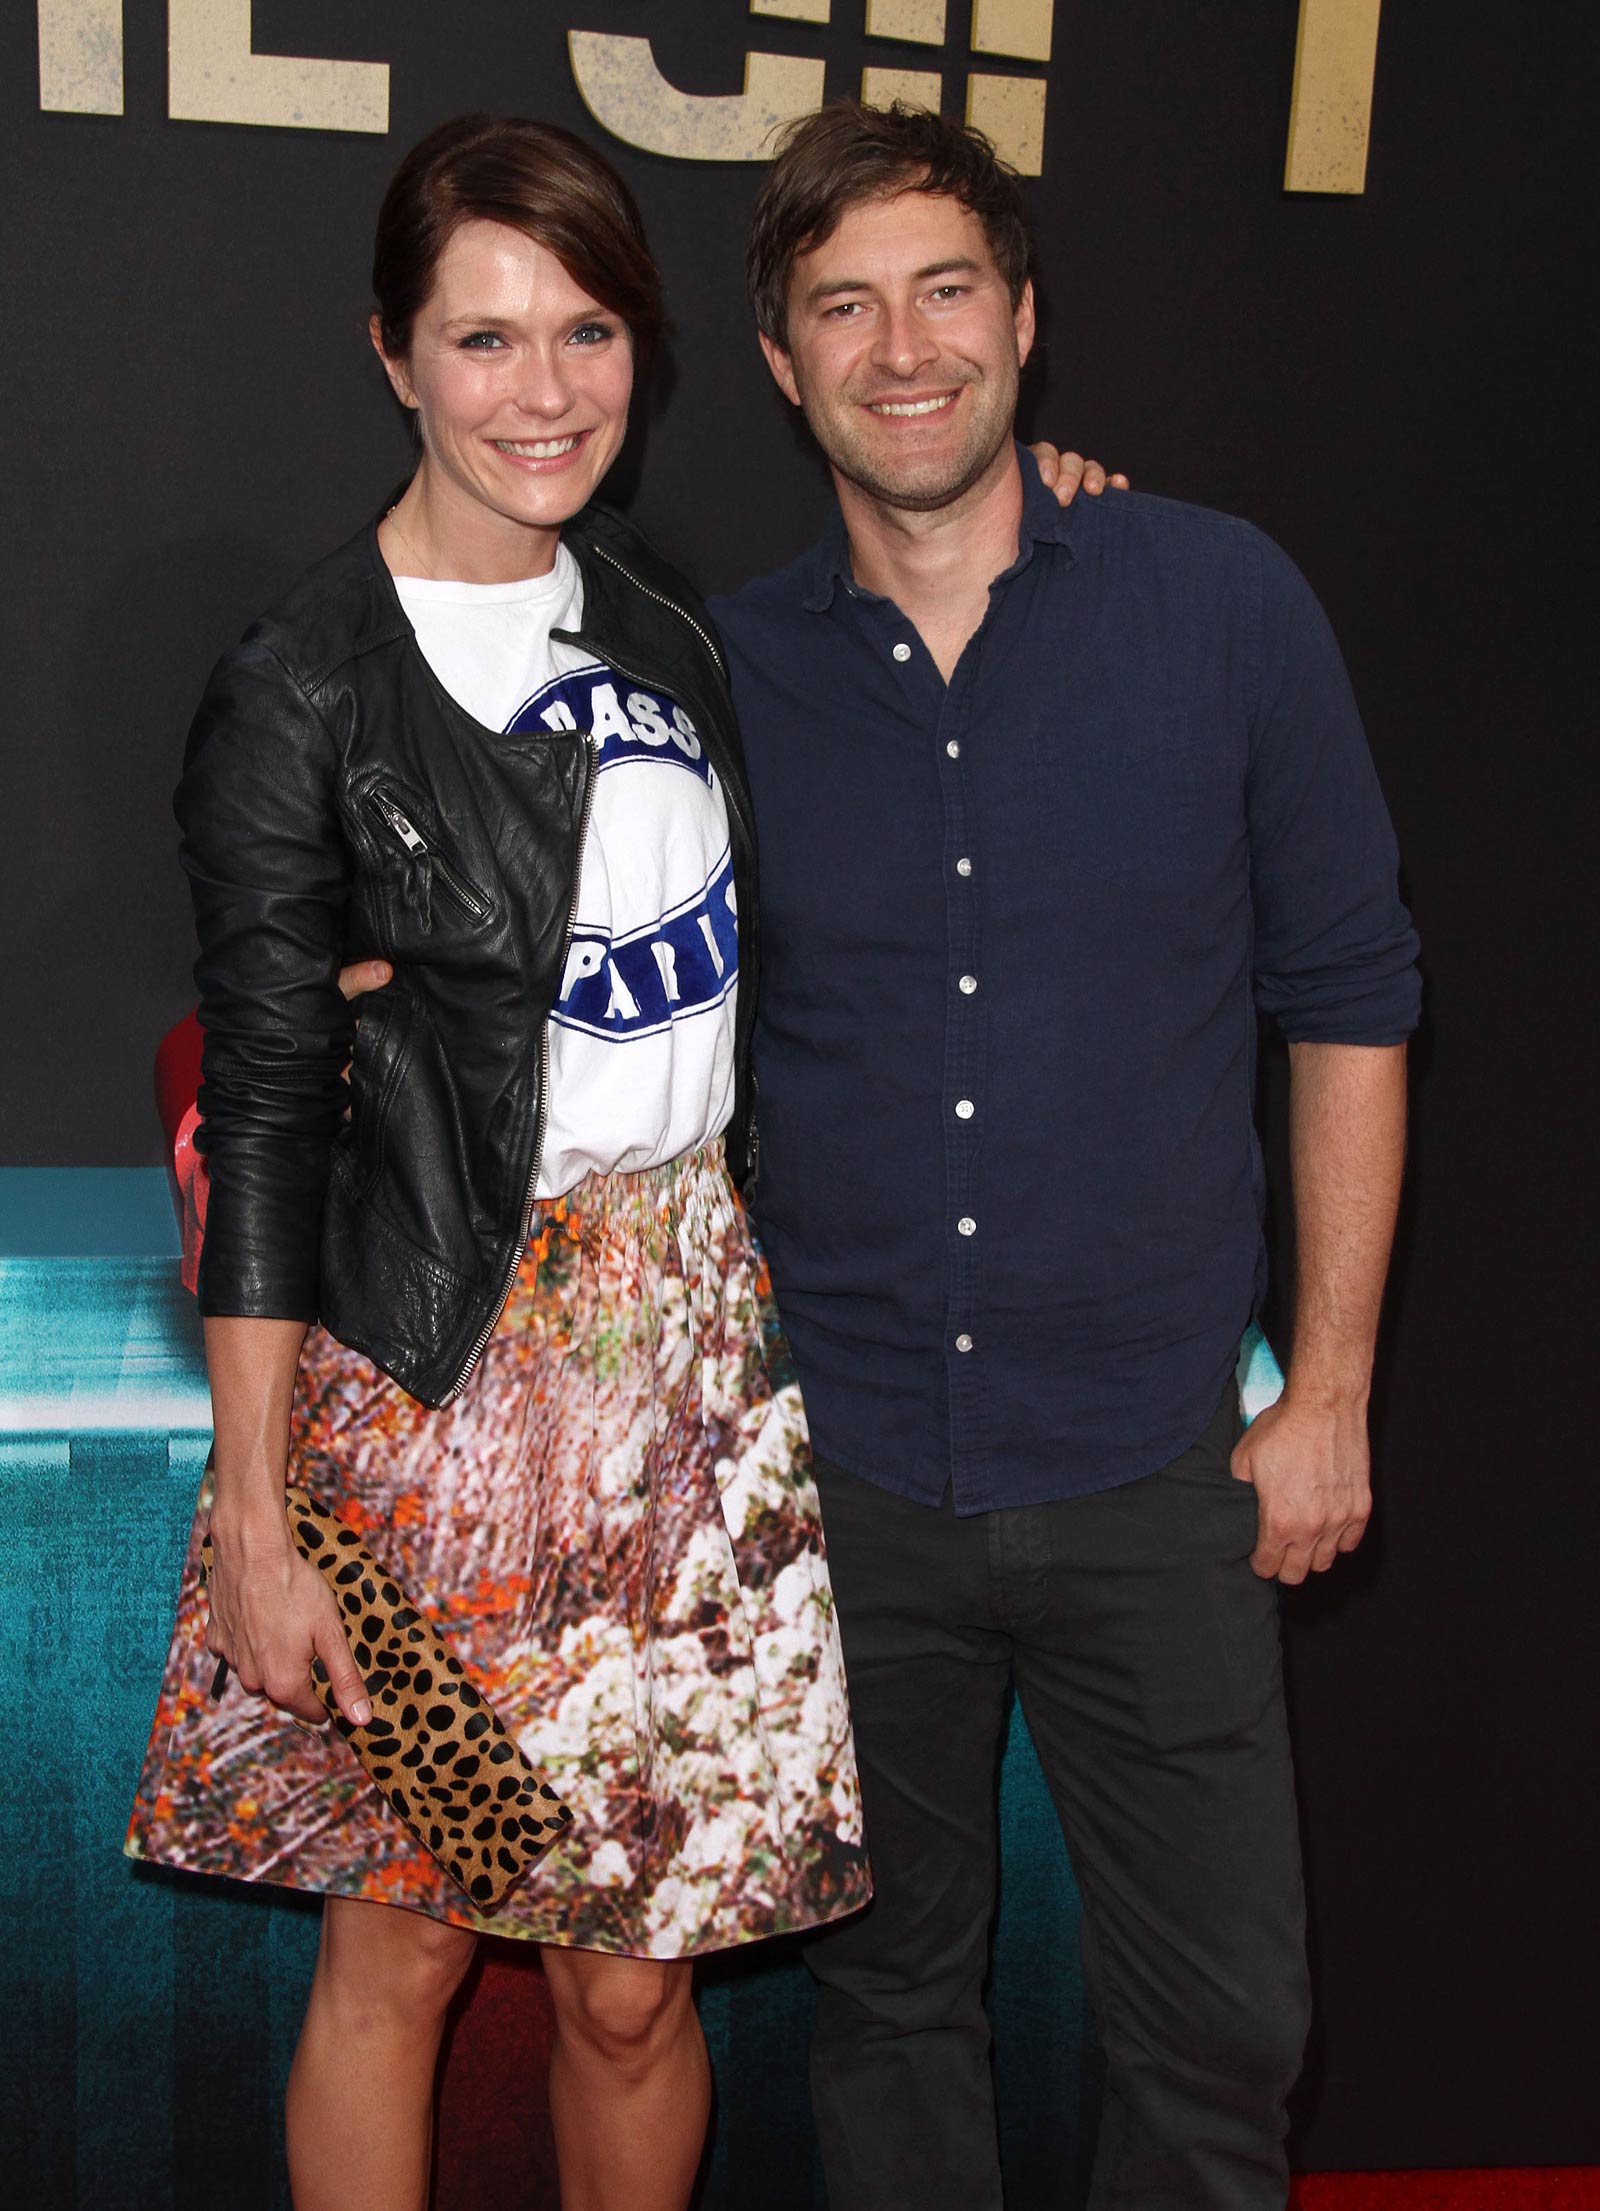 Katie Aselton attends The Gift Premiere